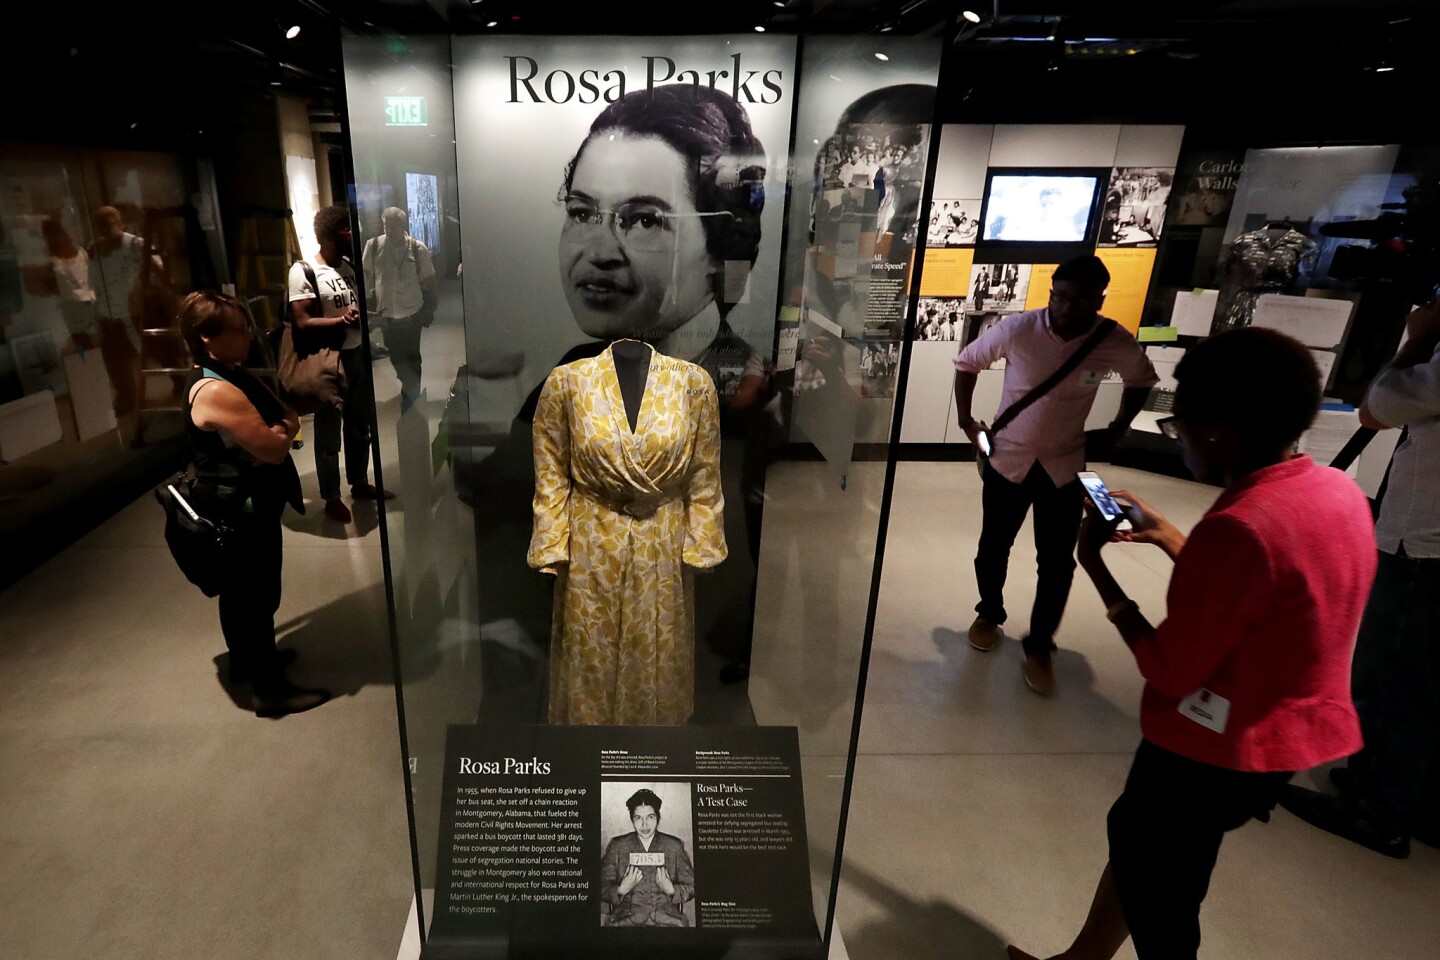 Civil rights pioneer Rosa Parks' dress is on display in the concourse galleries.